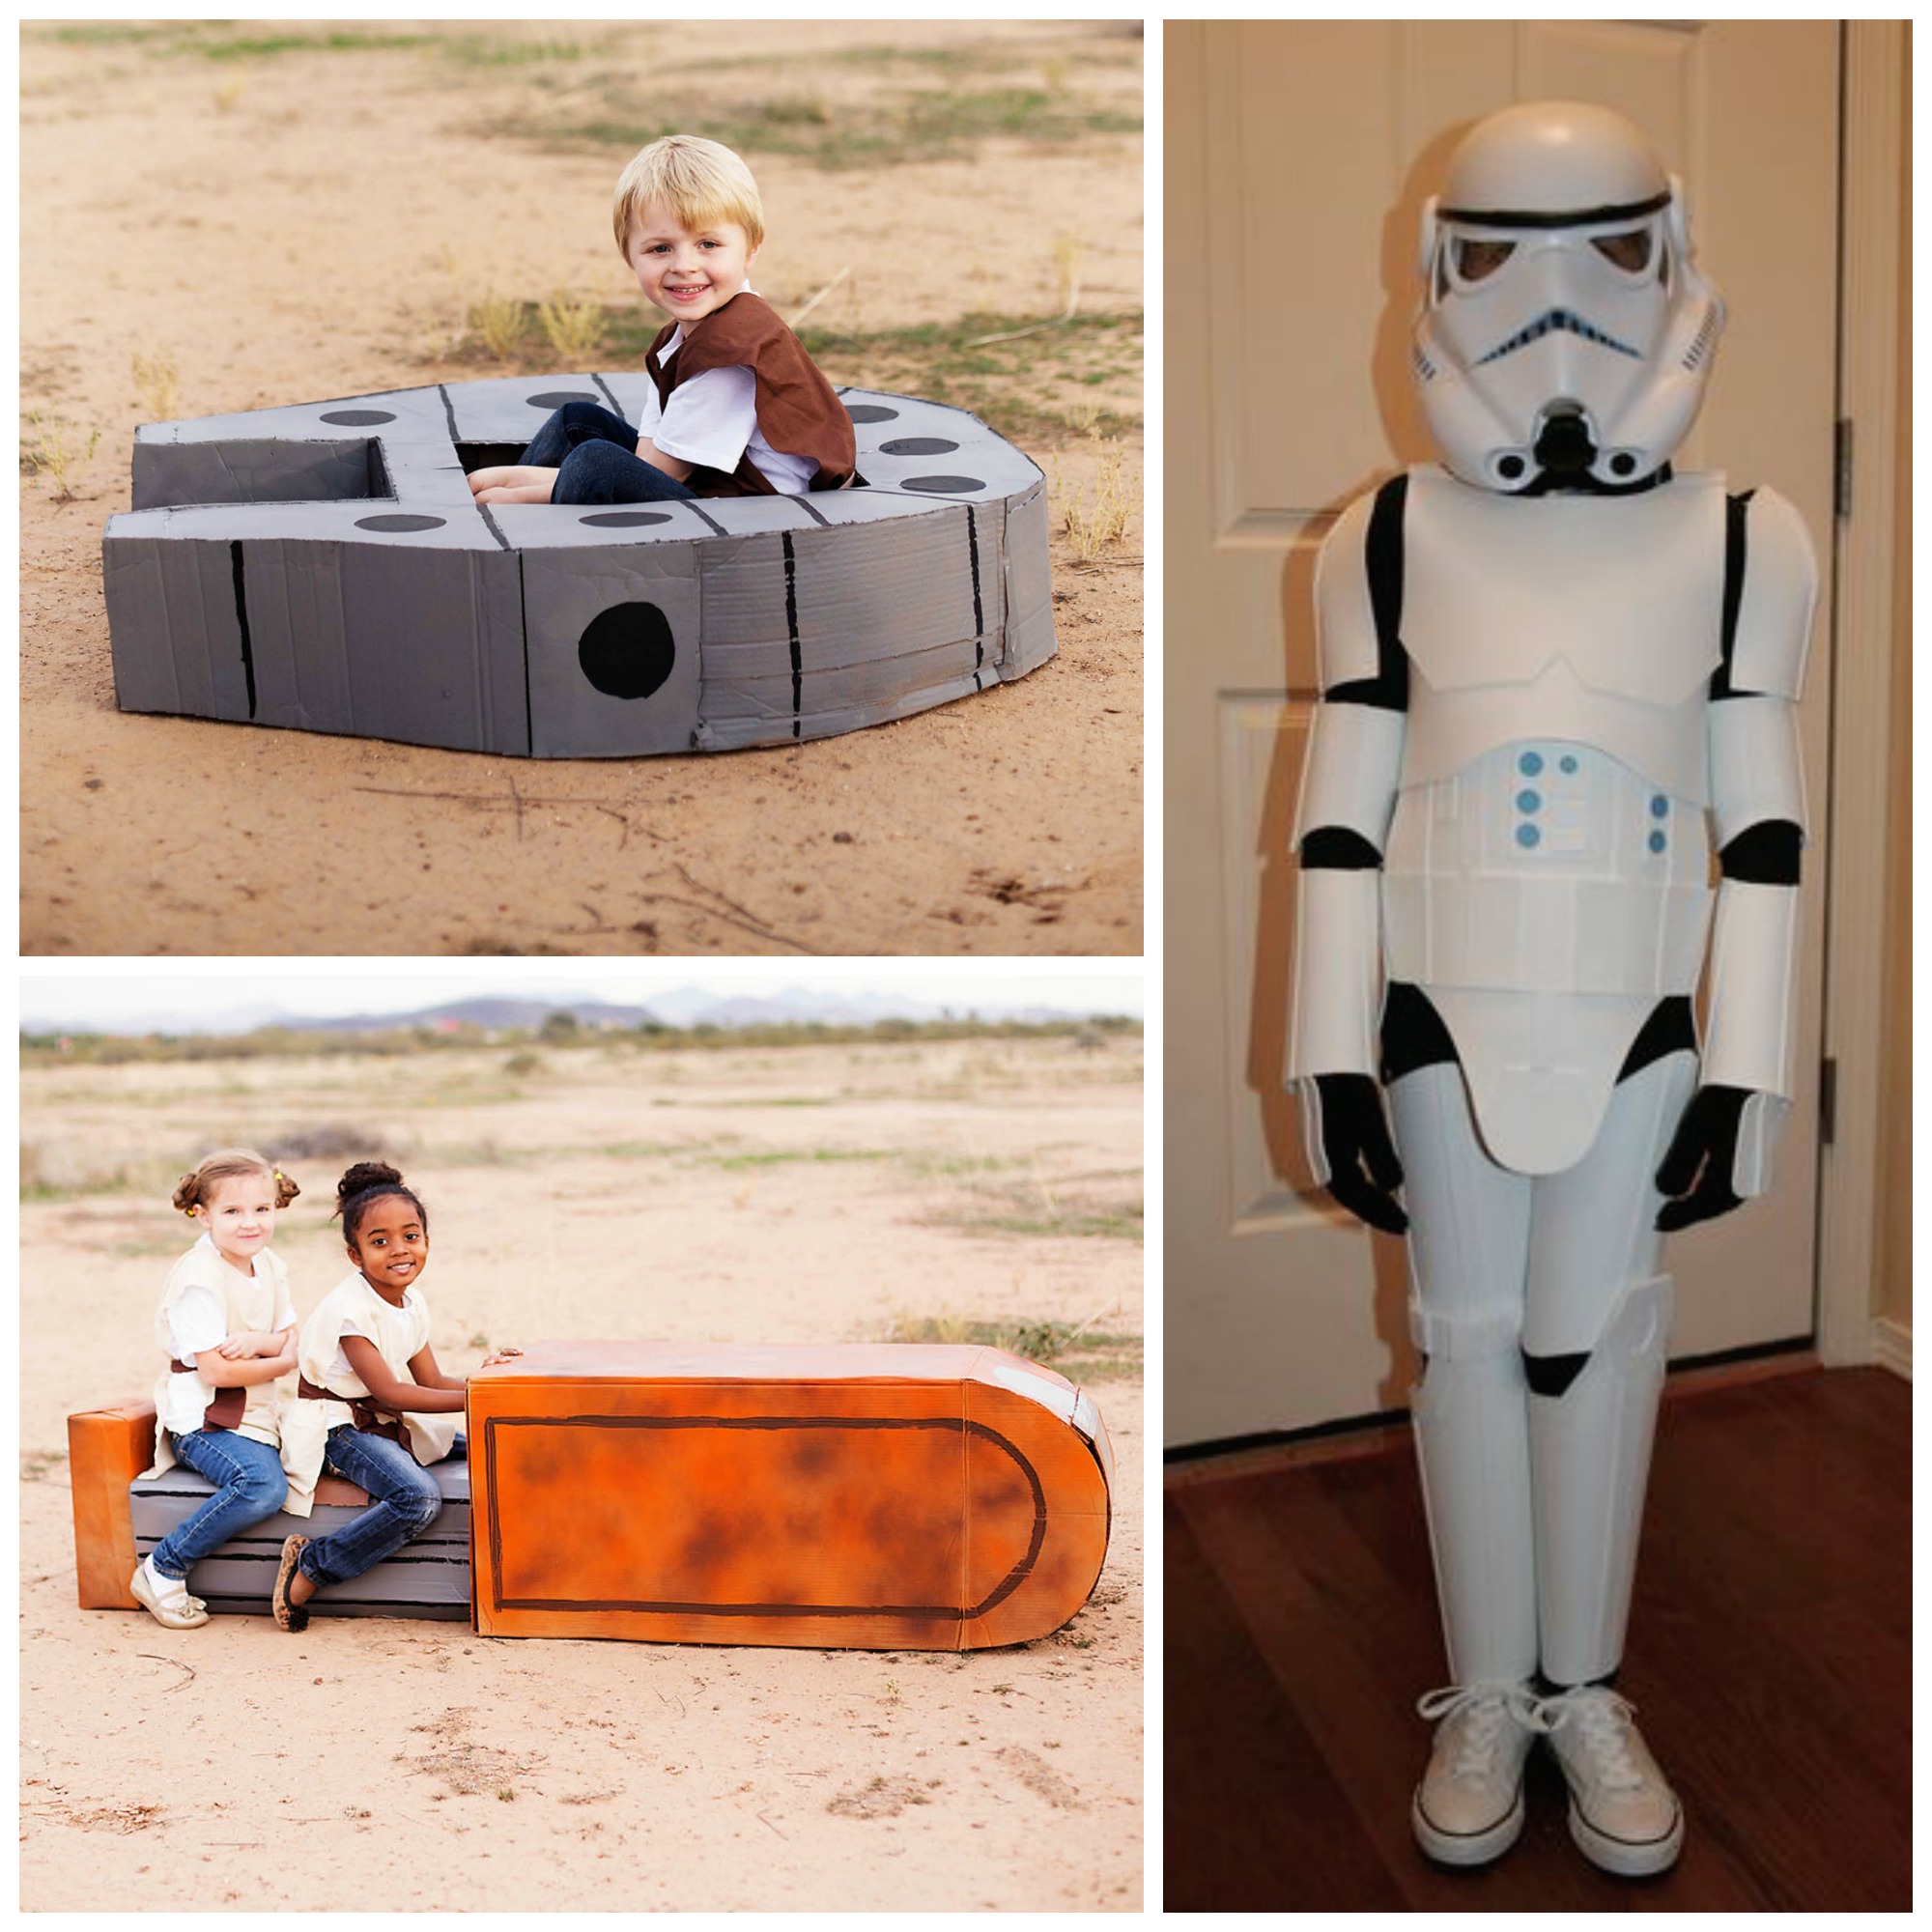 The Best Star Wars Costumes to Make for Kids